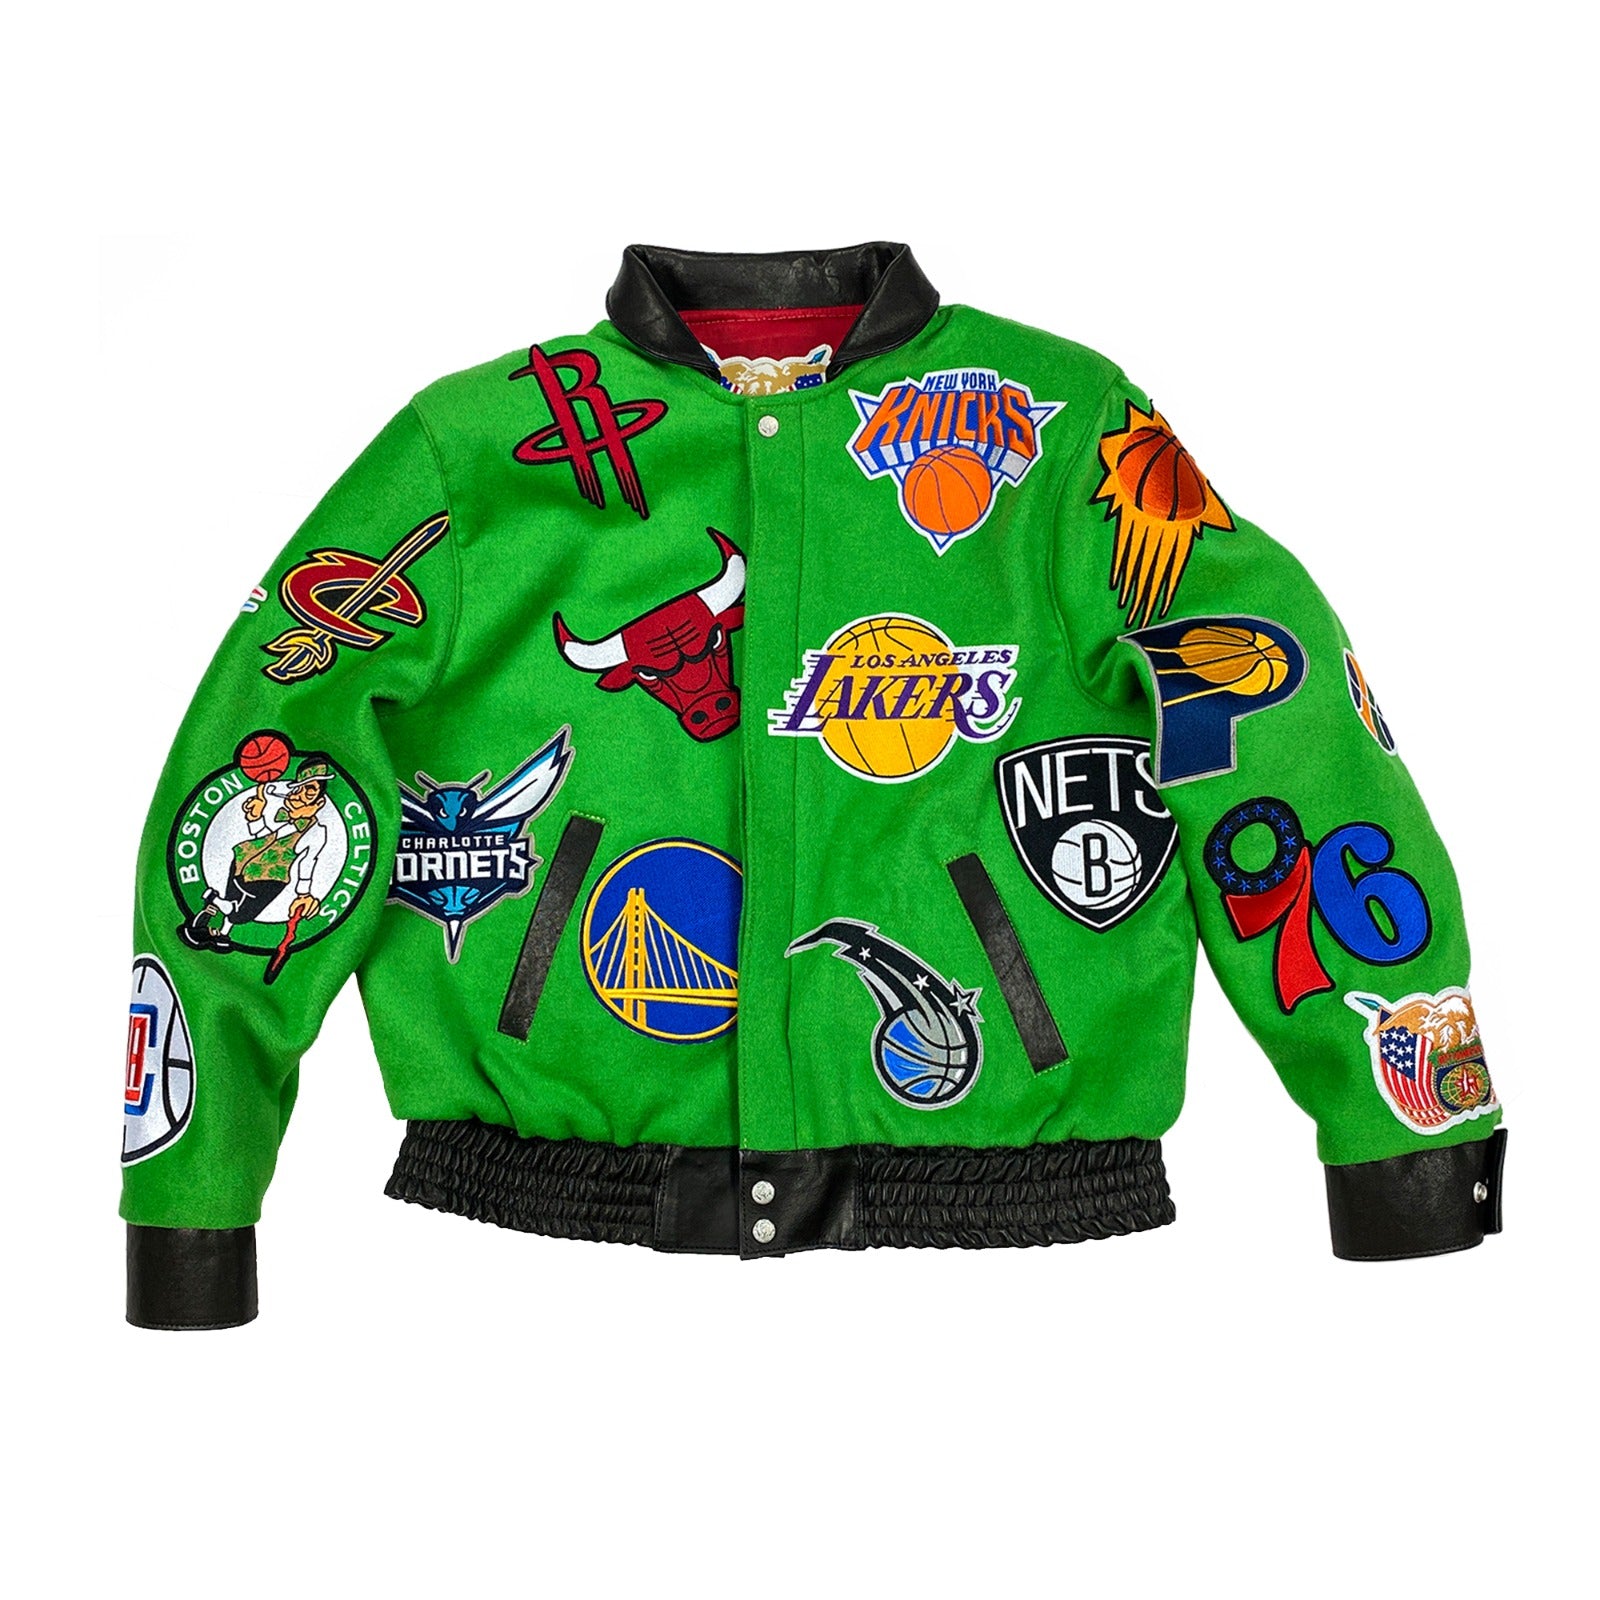 NBA COLLAGE WOOL/LEATHER